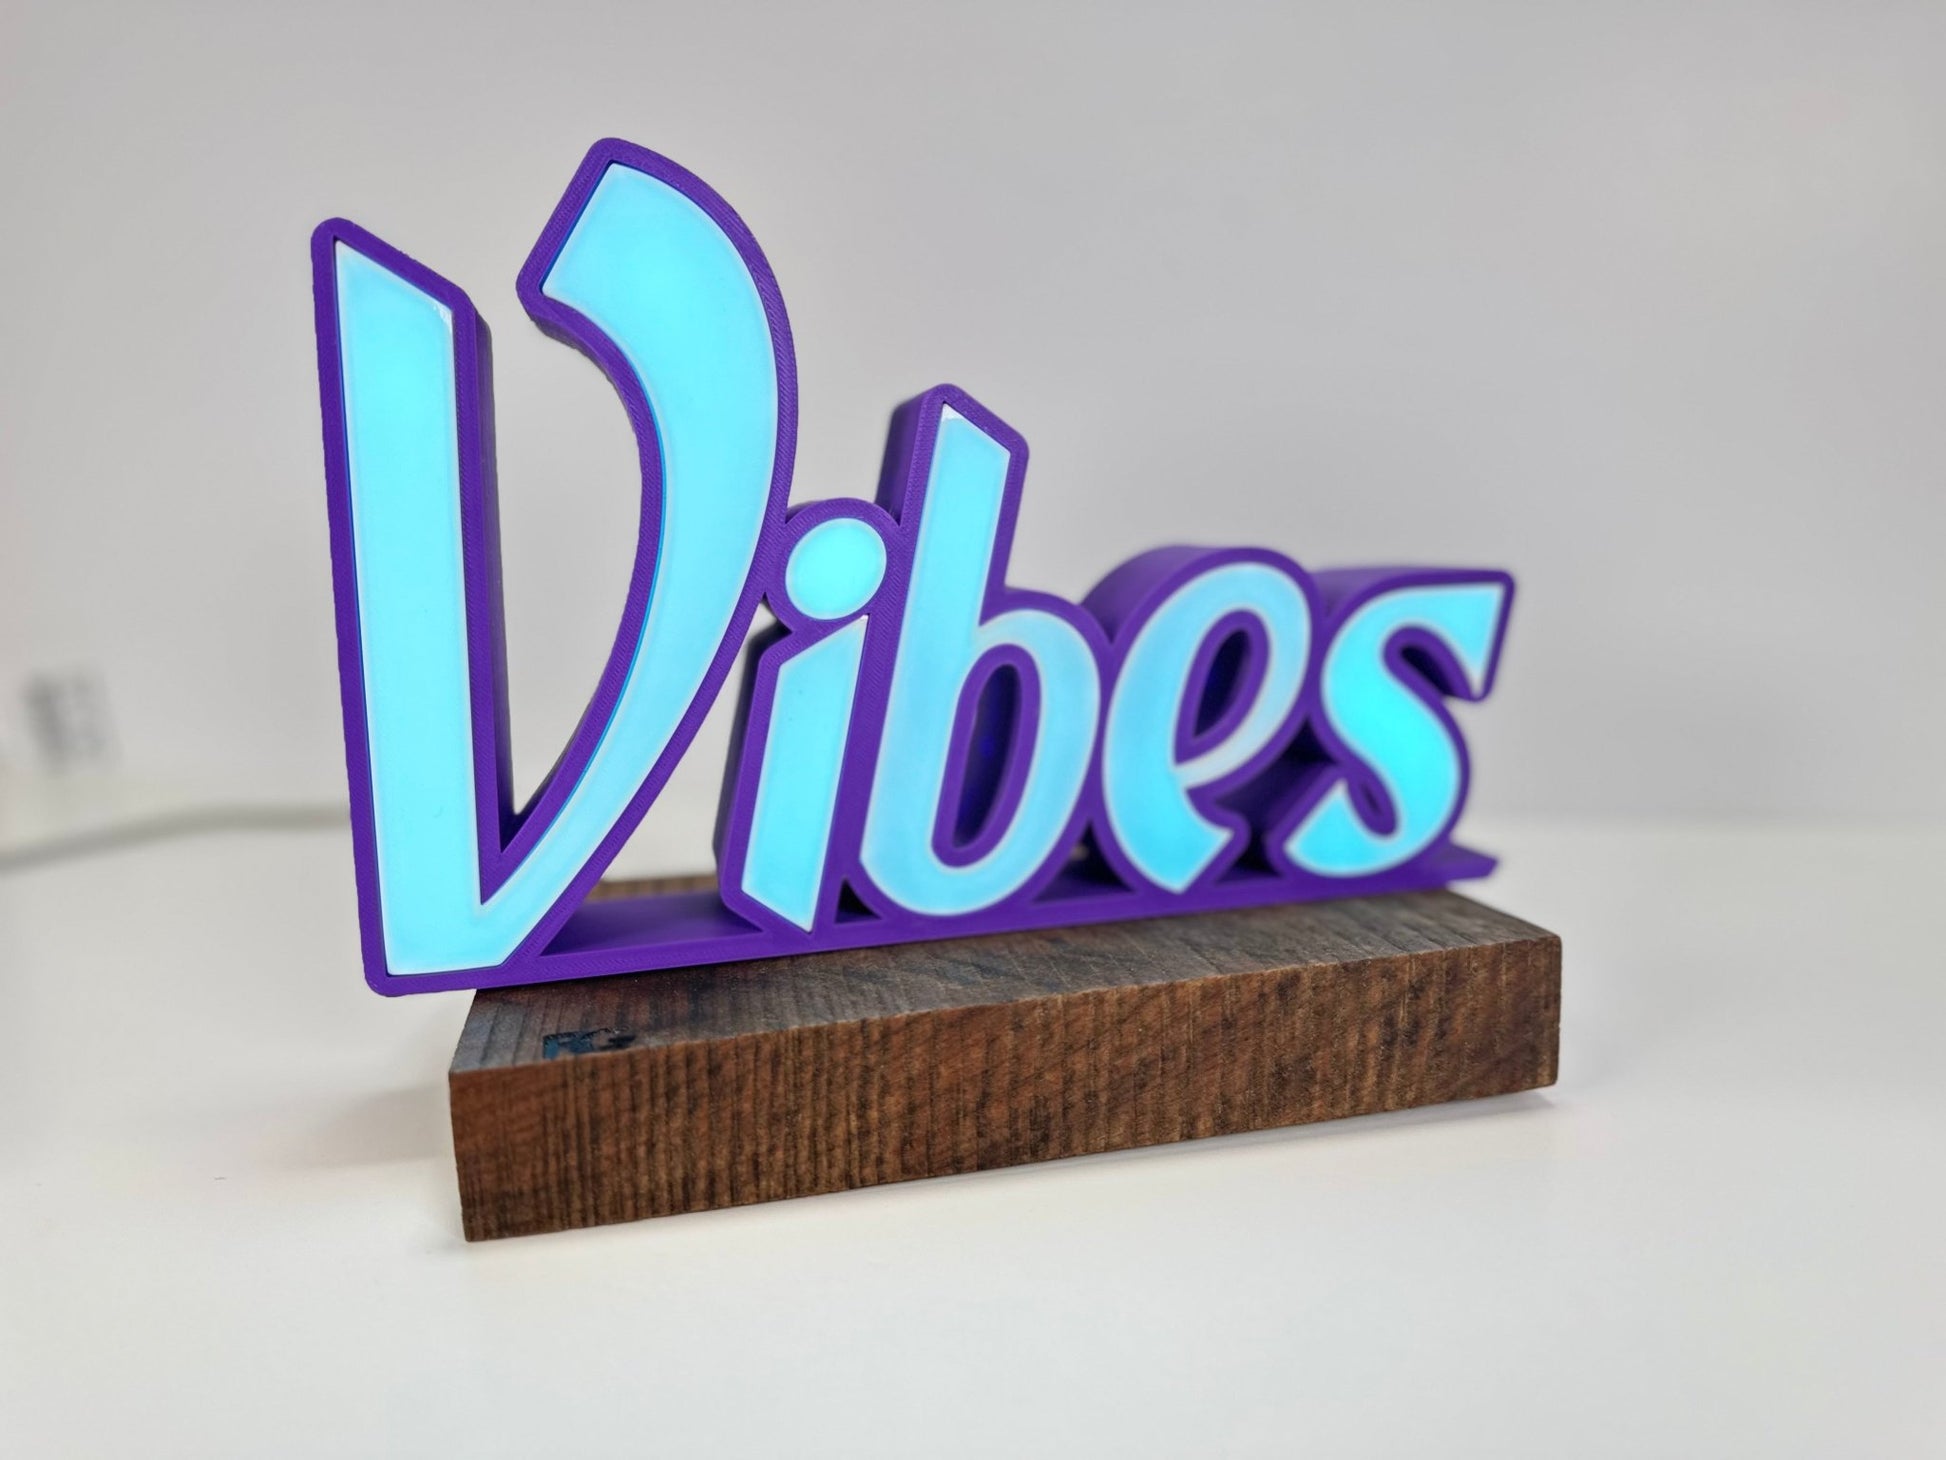 "Vibes" LED Sign - 3D Printed, Customizable Colors, Remote Controlled, 5V USB Powered Room Décor - RudeGrain3d Printed led Lit Sign